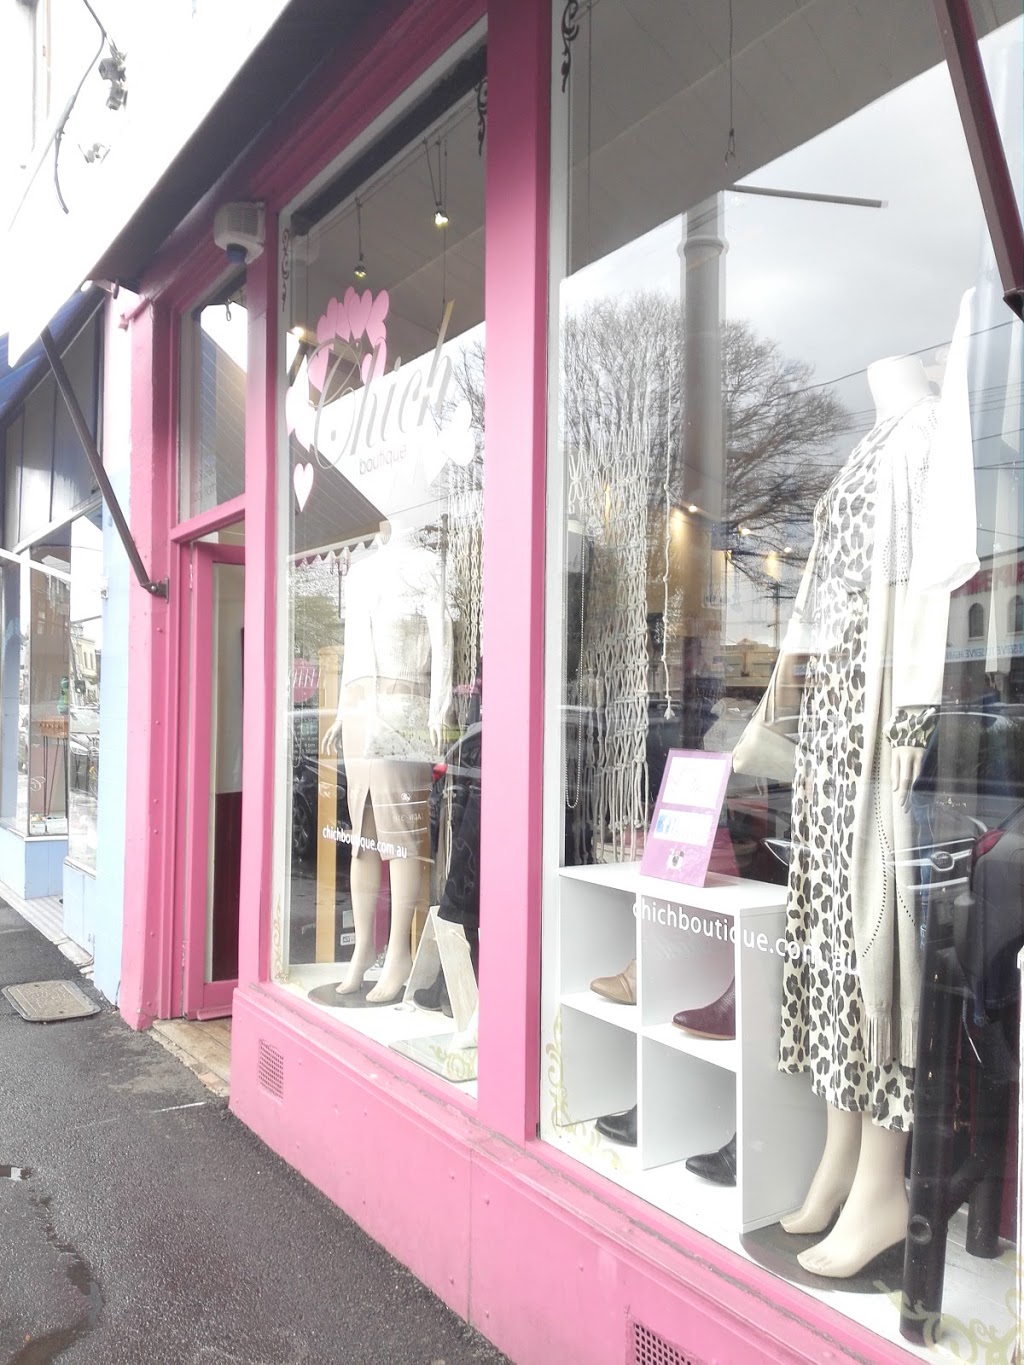 Chich Boutique | clothing store | 214 Lygon St, Brunswick East VIC 3057, Australia | 0434769039 OR +61 434 769 039